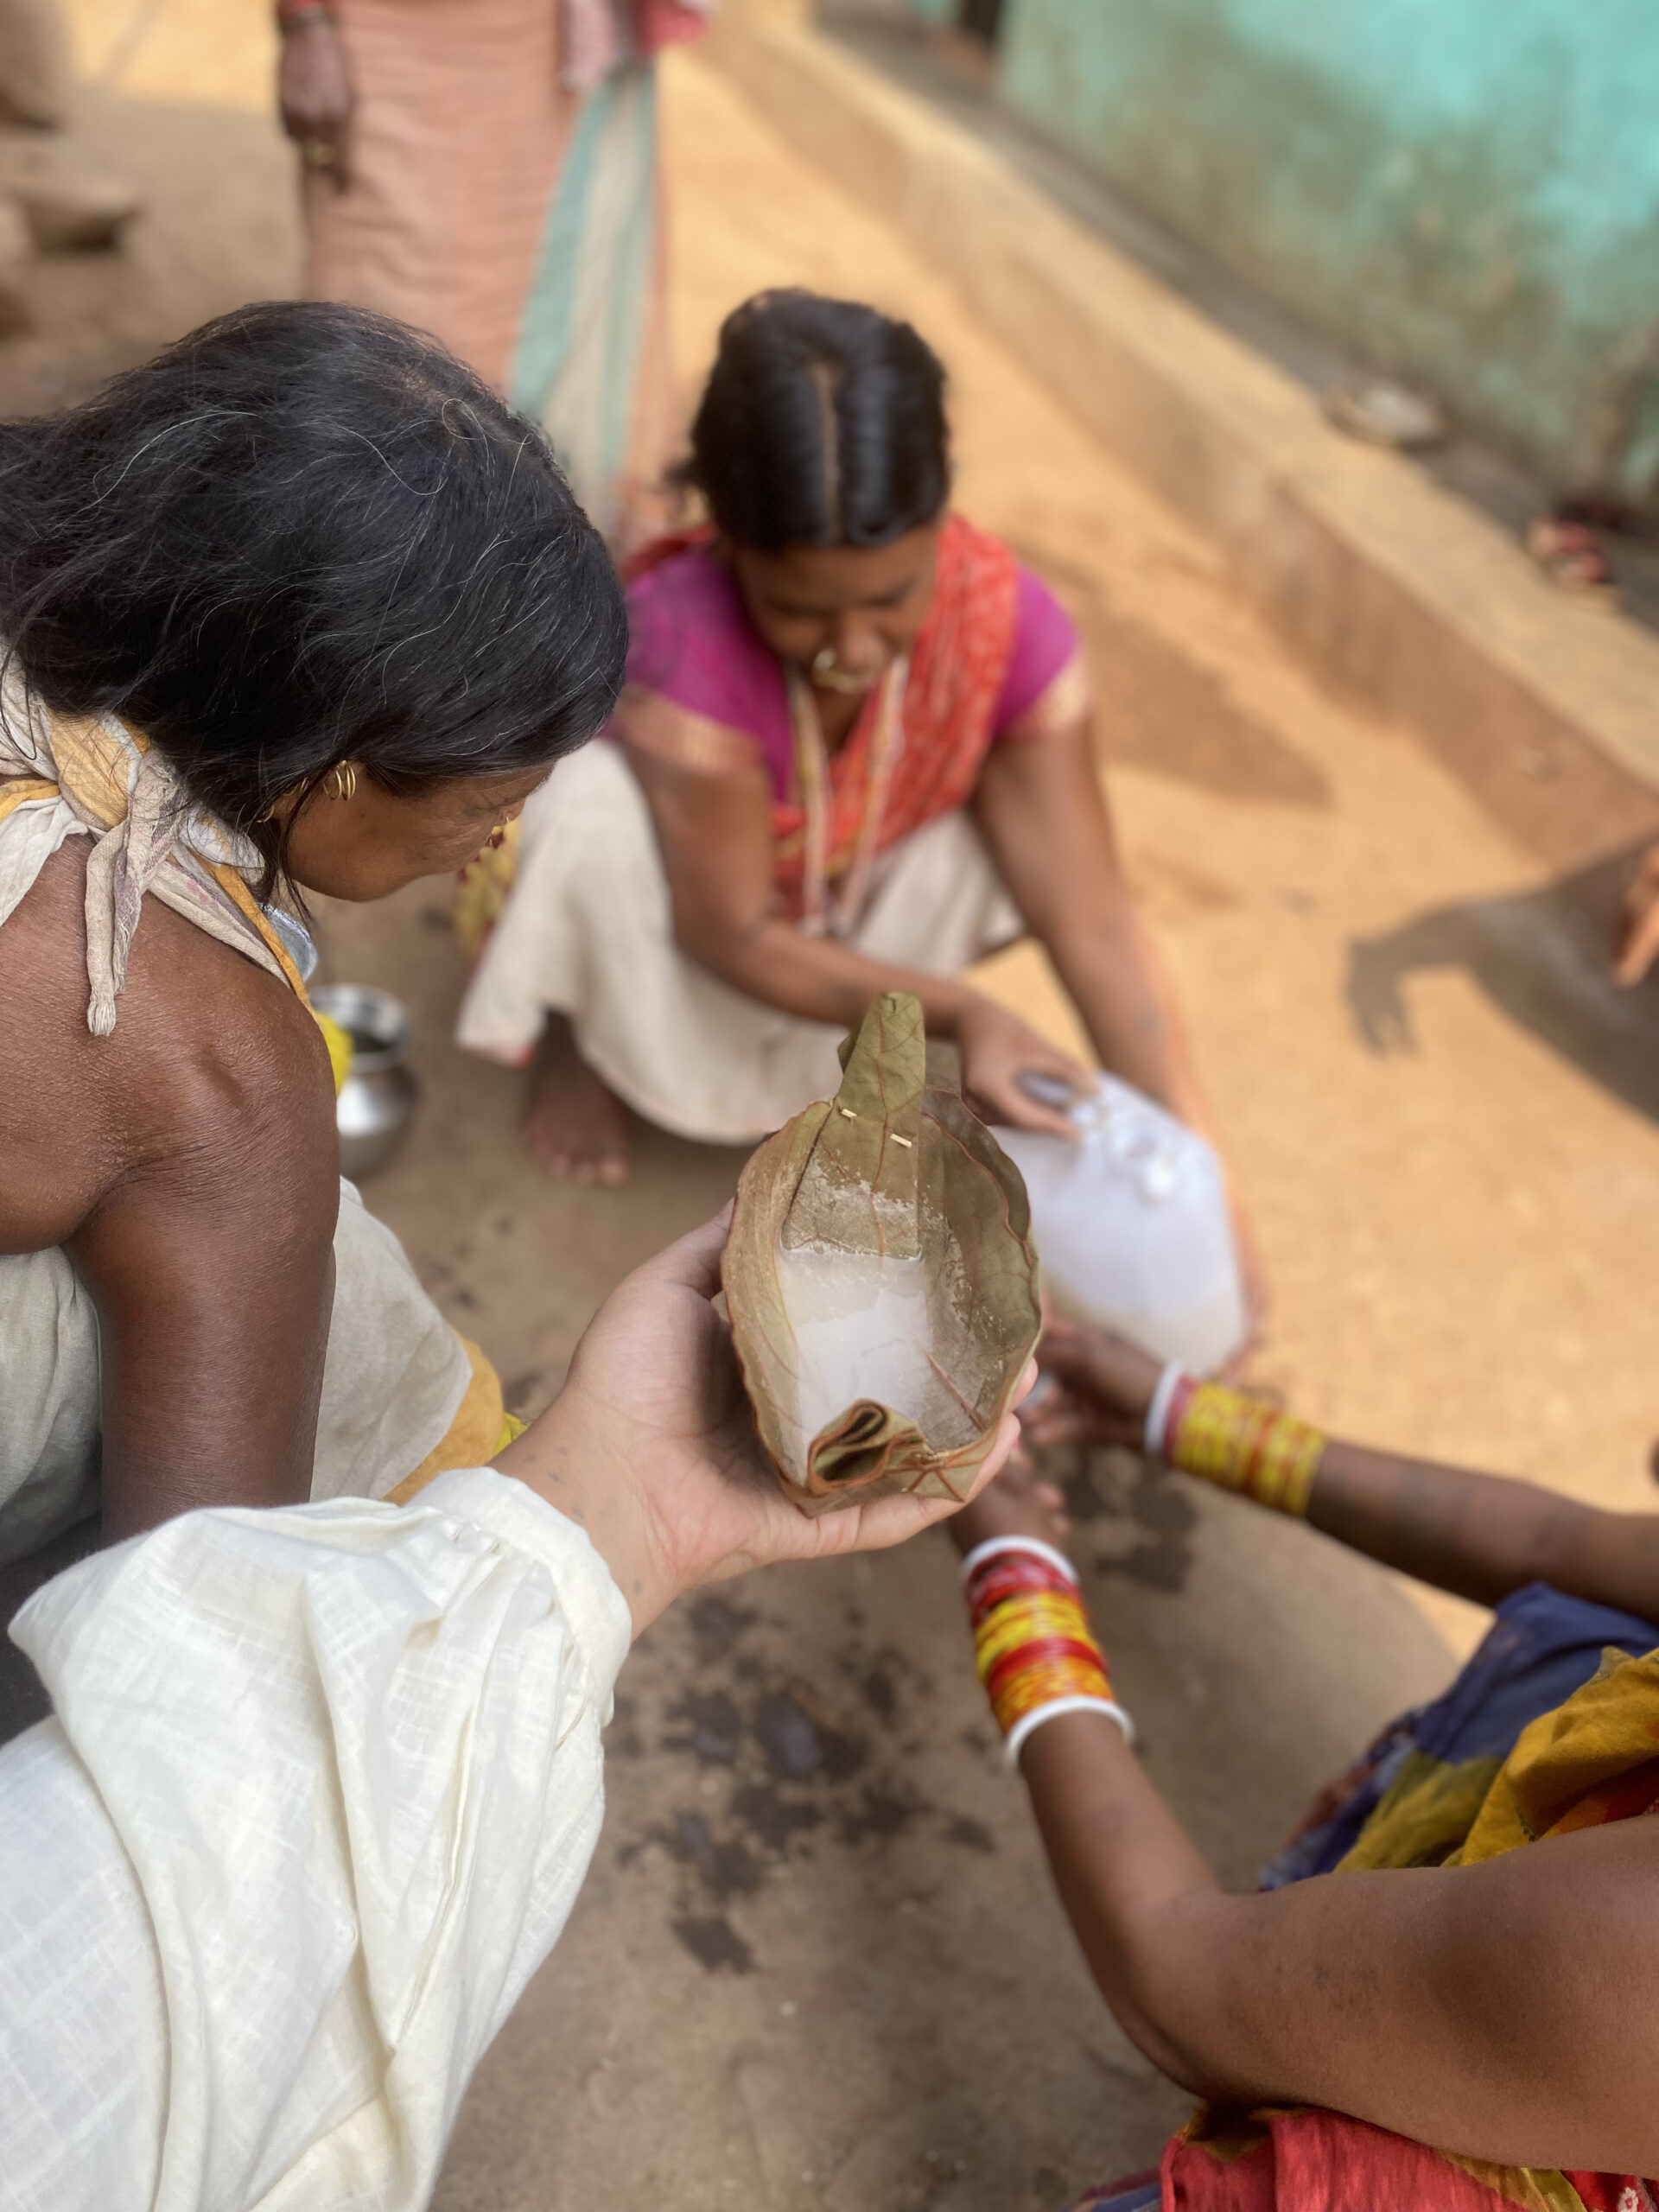 I Left City Life for an Odisha Village; Here’s What I Learned About Sustainable Cooking